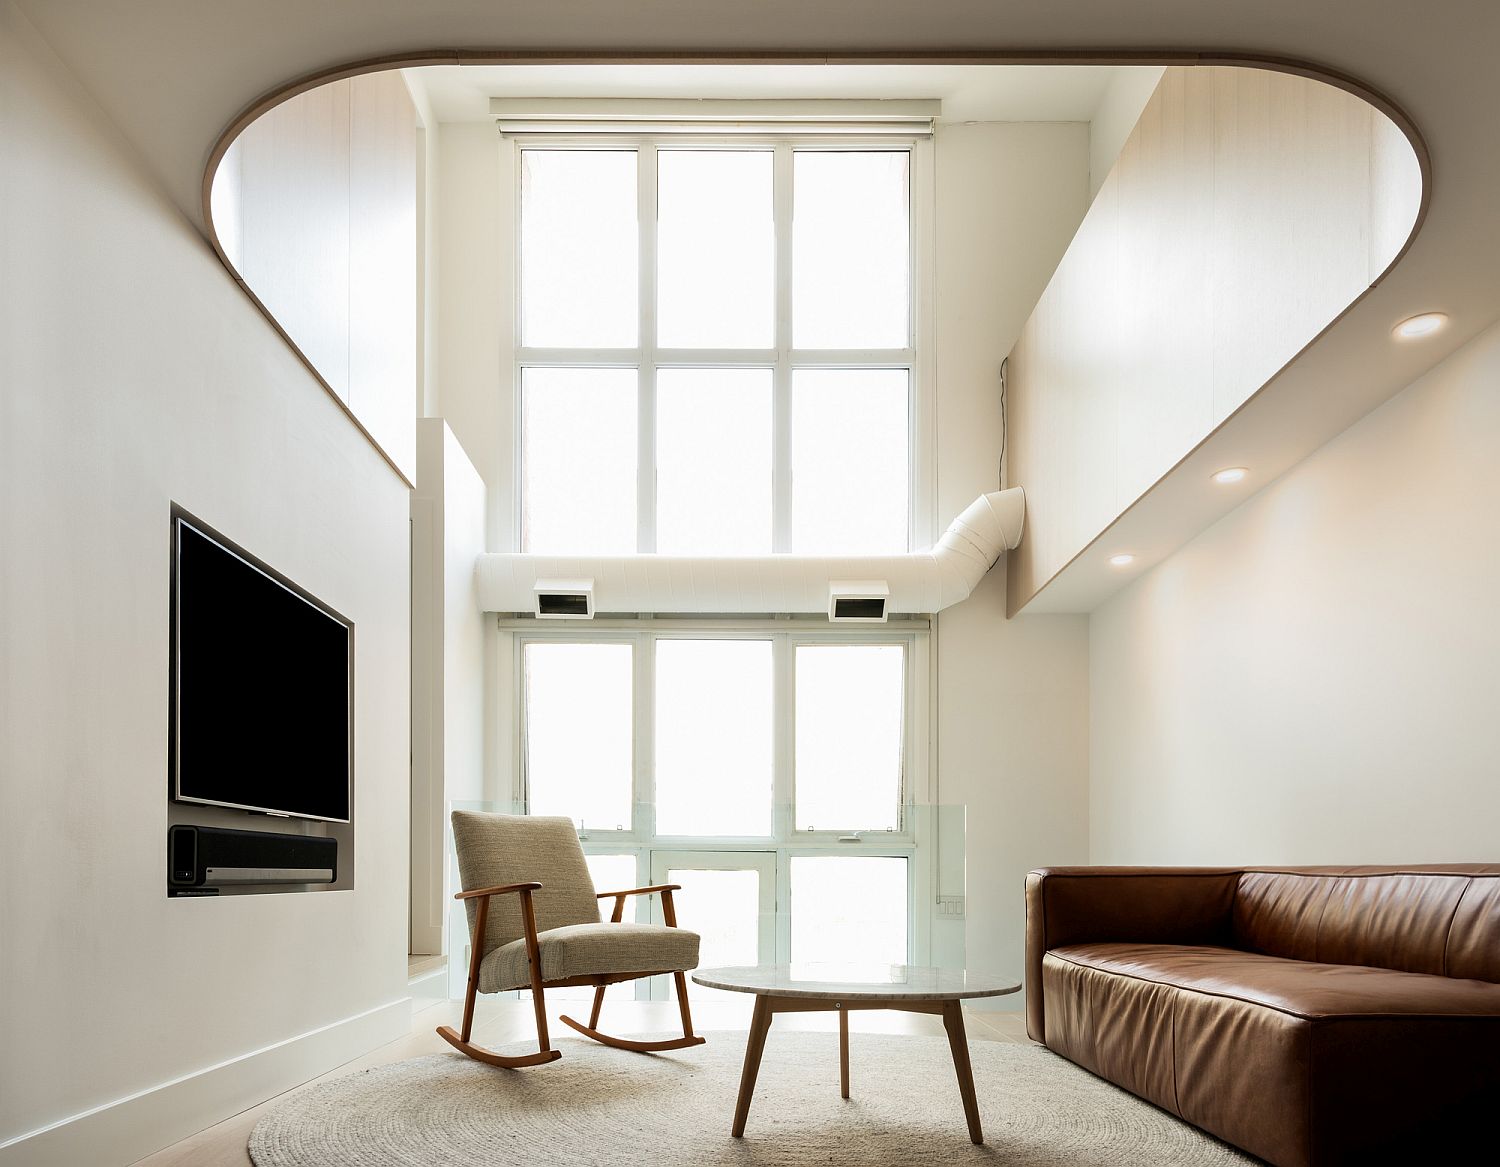 Expansive form of the living area has been utilized to hilt inside the loft